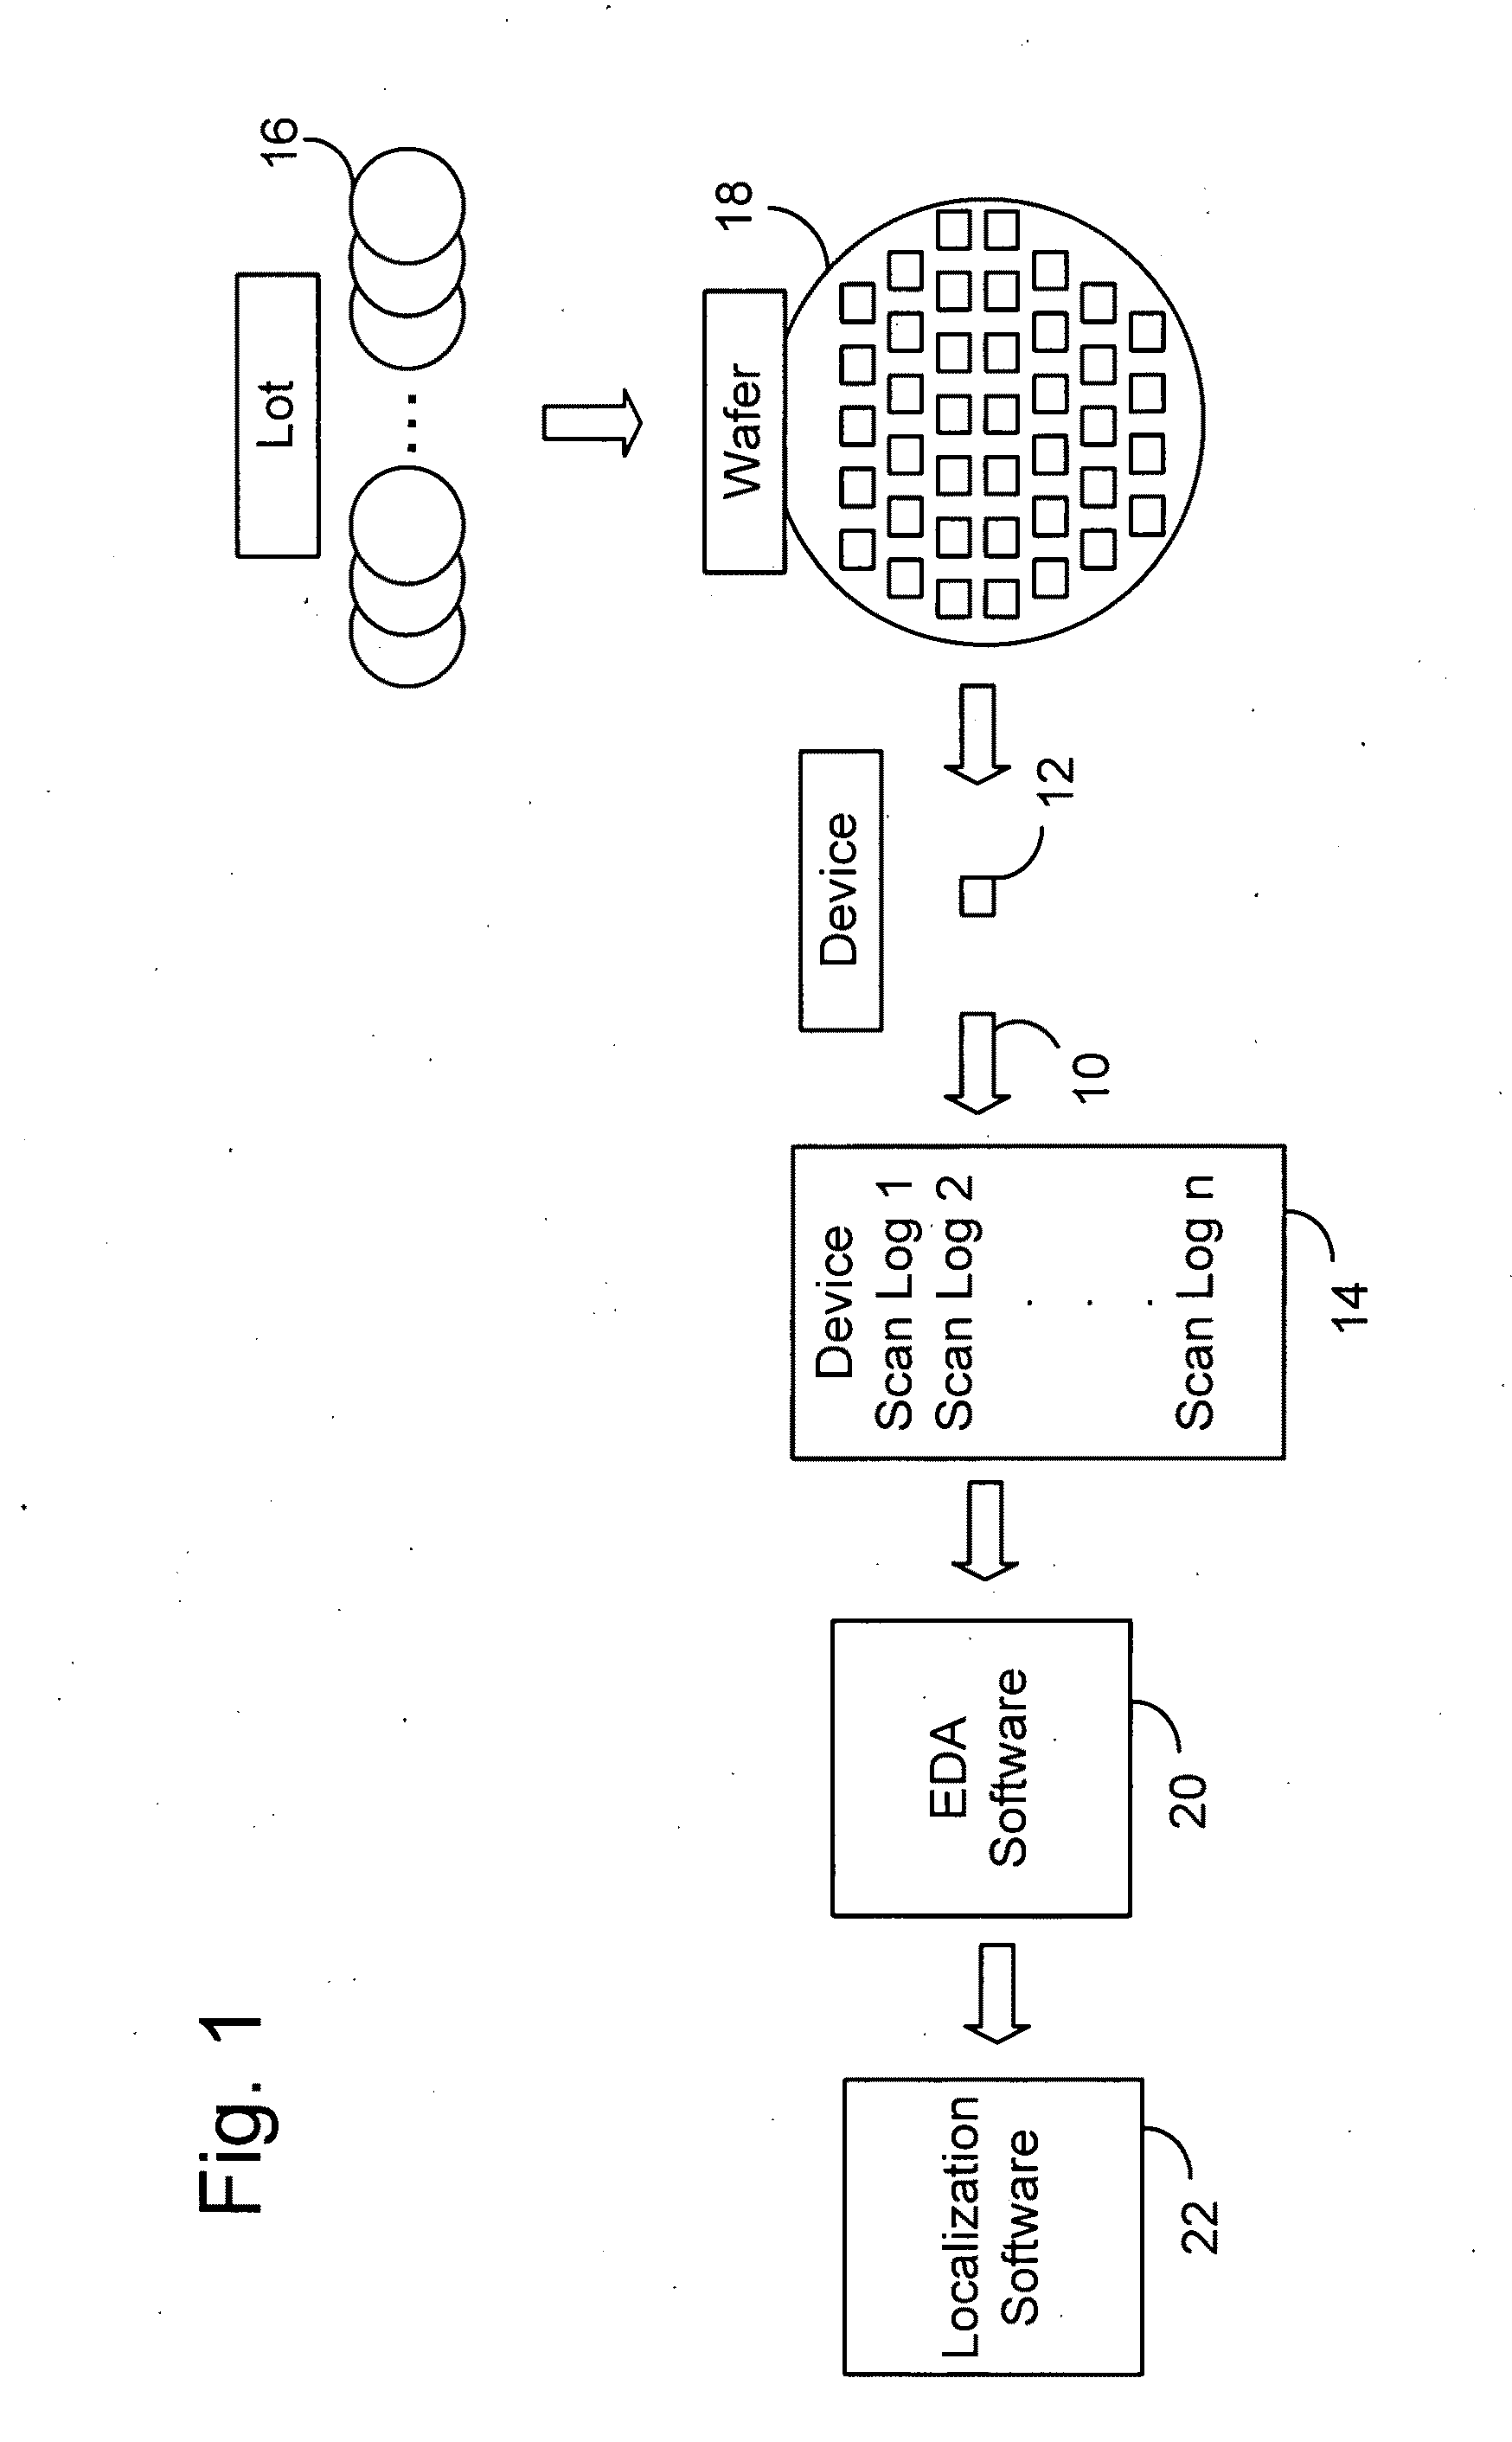 Secure test-for-yield chip diagnostics management system and method